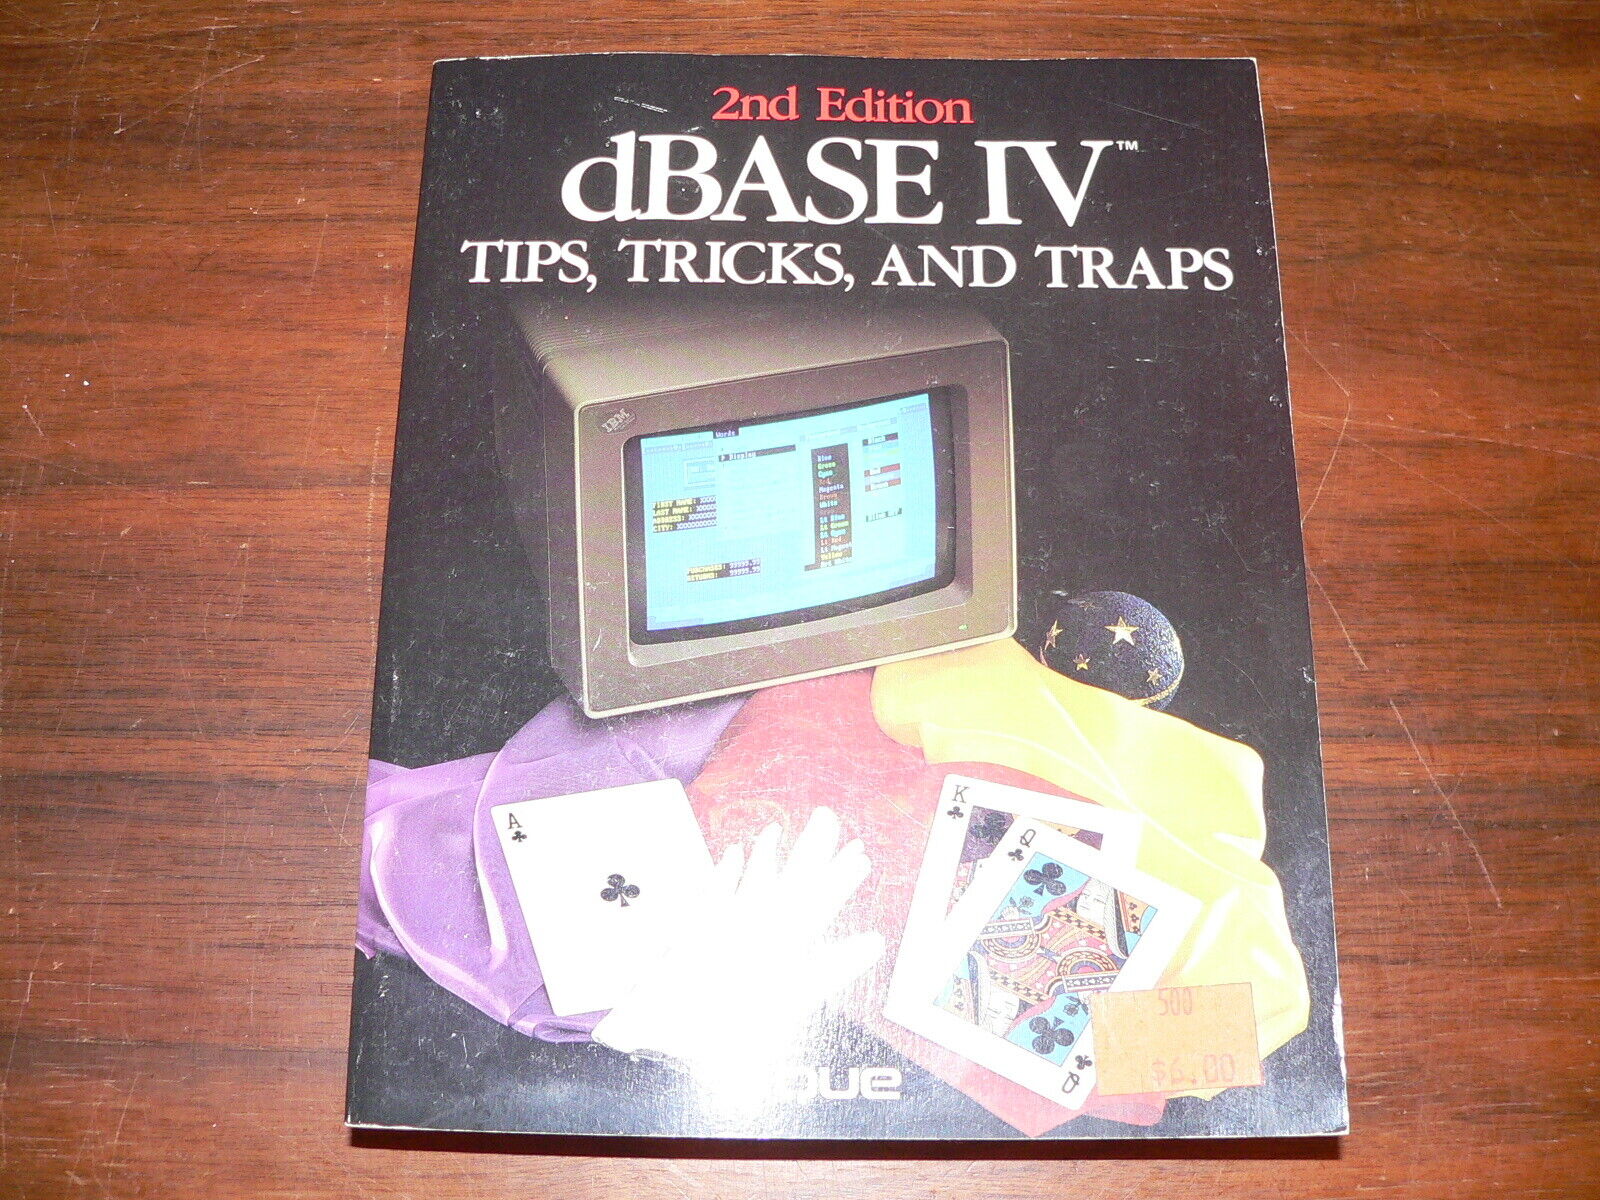 Vintage 1989 dBase IV Tips, Tricks, and Traps 2nd Edition Software Manual